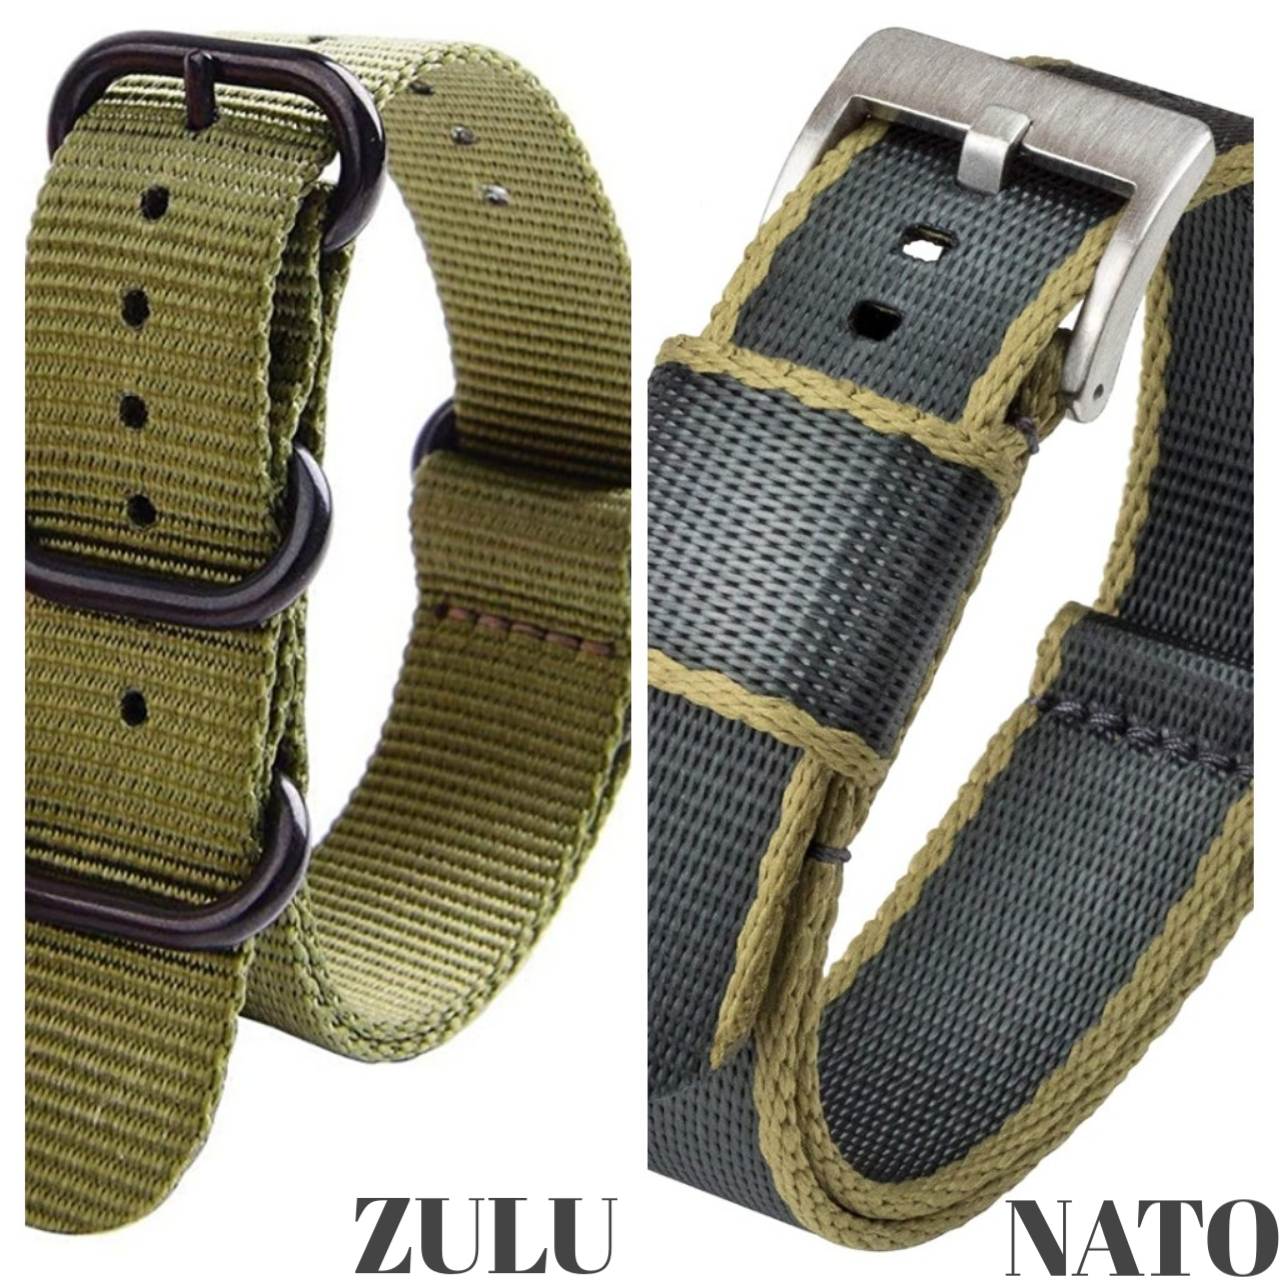 Know The Difference Between NATO and Zulu Watch Straps: NATO vs Zulu straps » Ticks Of Time